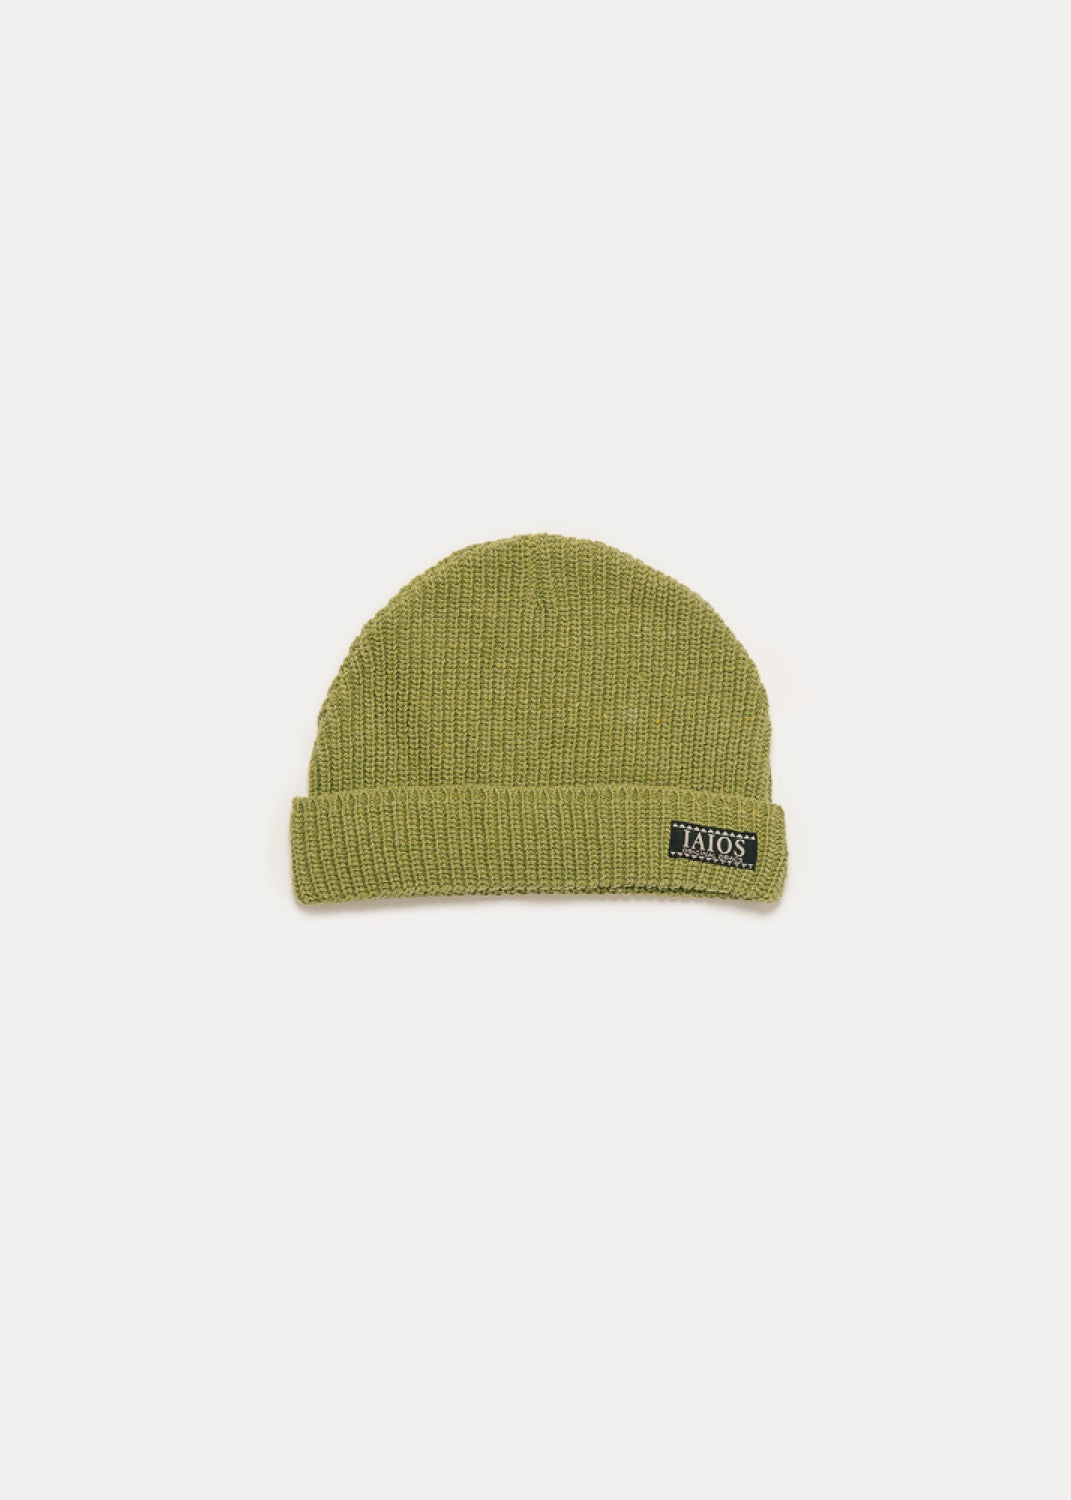 Pistachio green beanie for winter. It is a basic and plain hat.